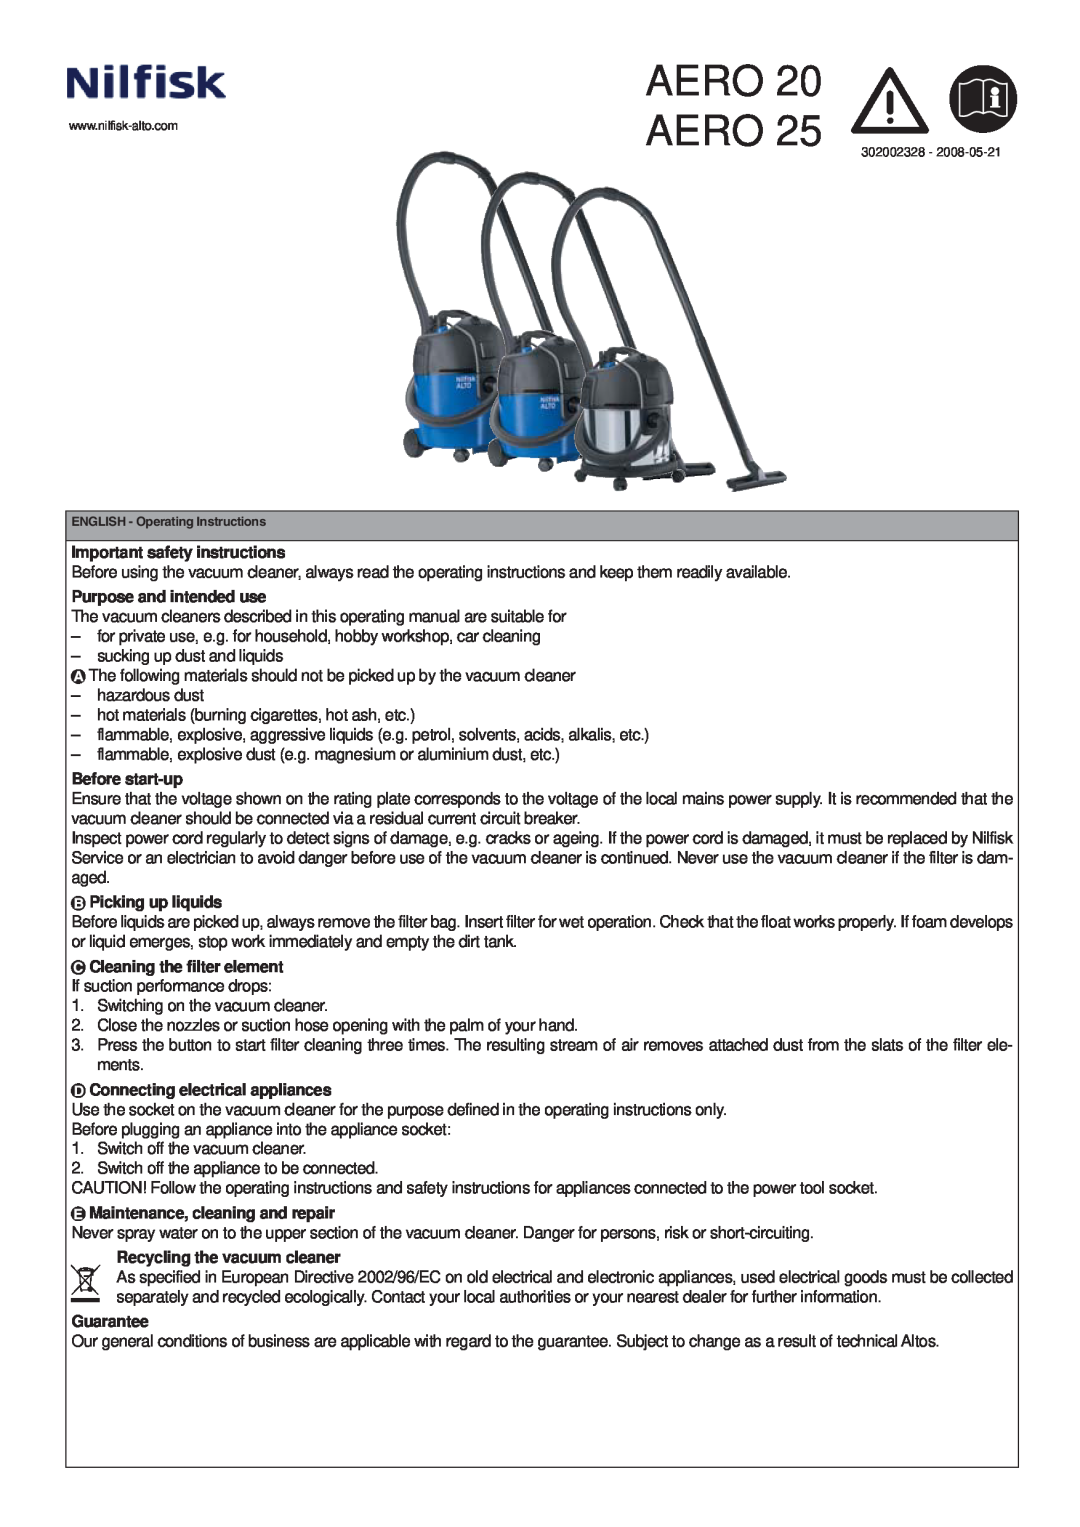 Nilfisk-ALTO Aero 20 operating instructions Important safety instructions, Purpose and intended use, Before start-up 